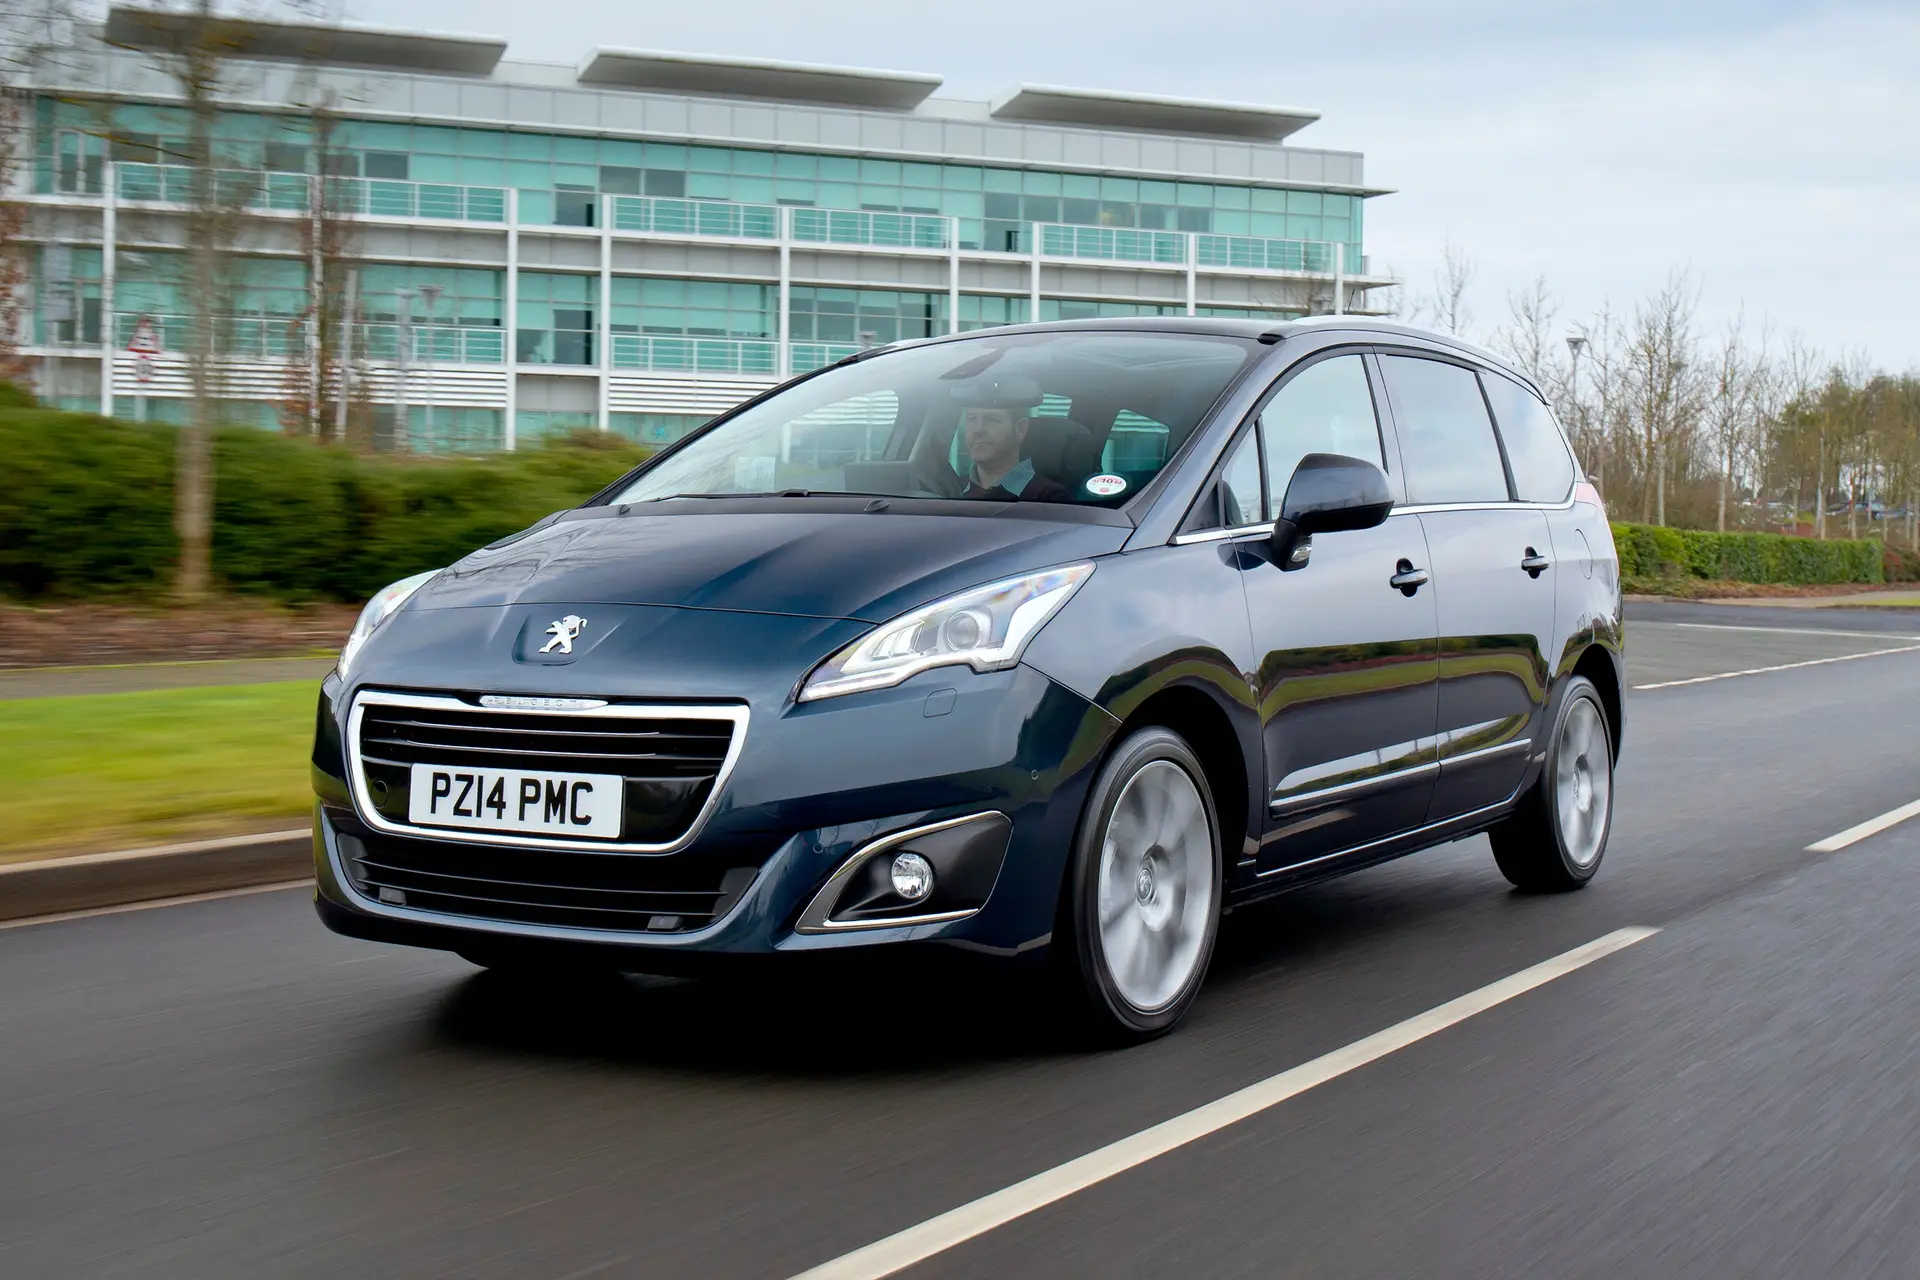 Peugeot 5008 (2010-2018) Review: exterior front three quarter photo of the Peugeot 5008 on the road